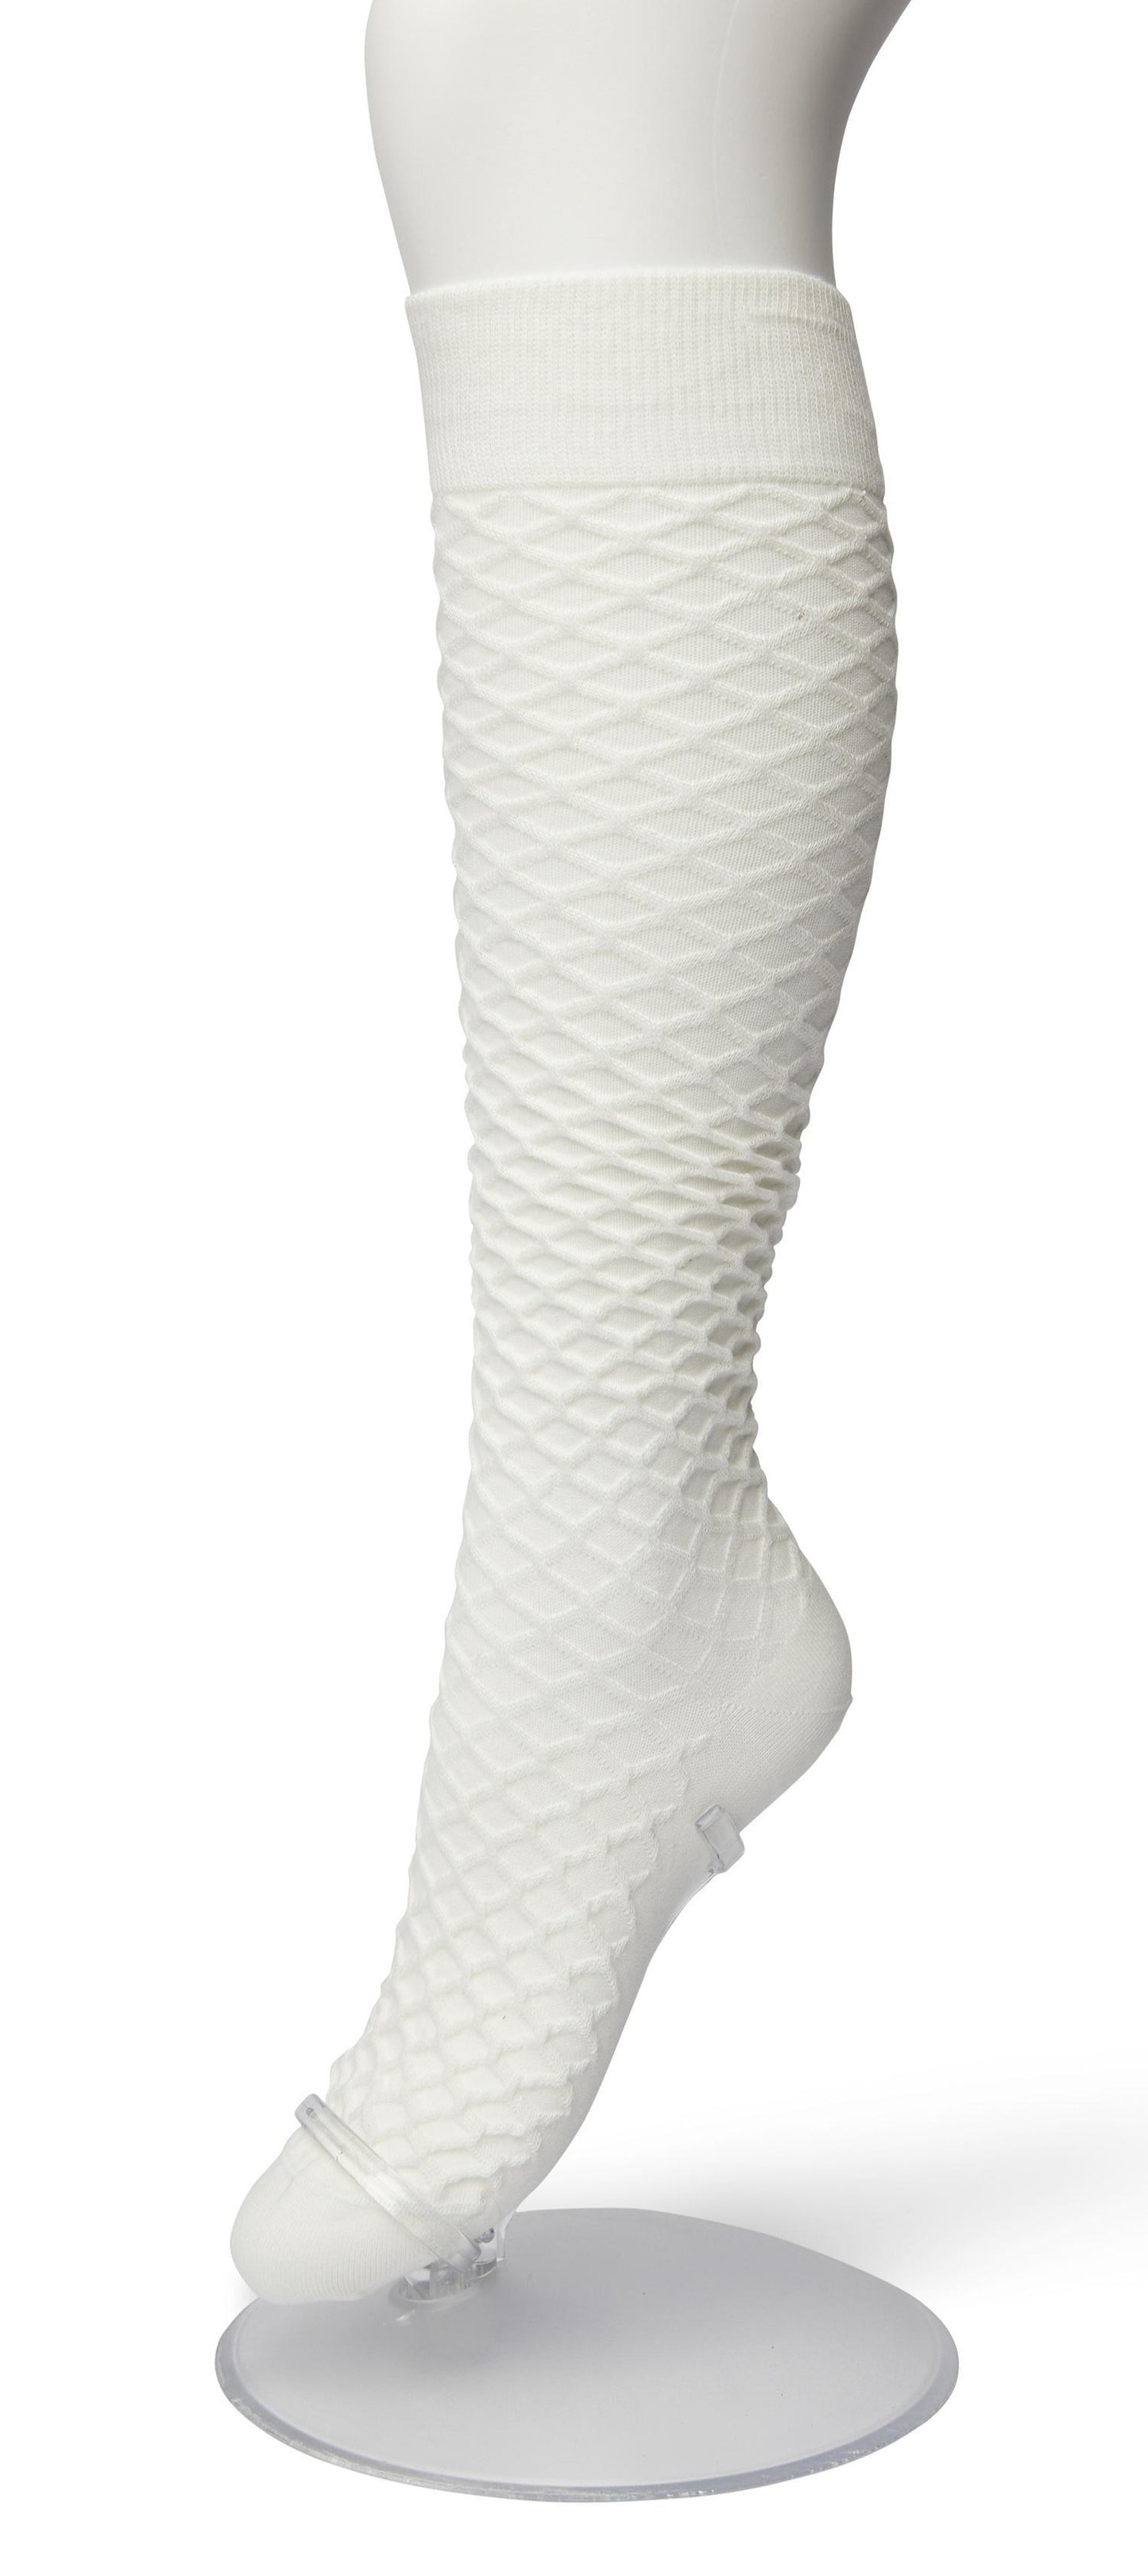 Bonnie Doon BP211506 Cable Knee-highs - Ivory (off white) soft and warm knitted knee-high socks with a criss-cross diamond textured pattern